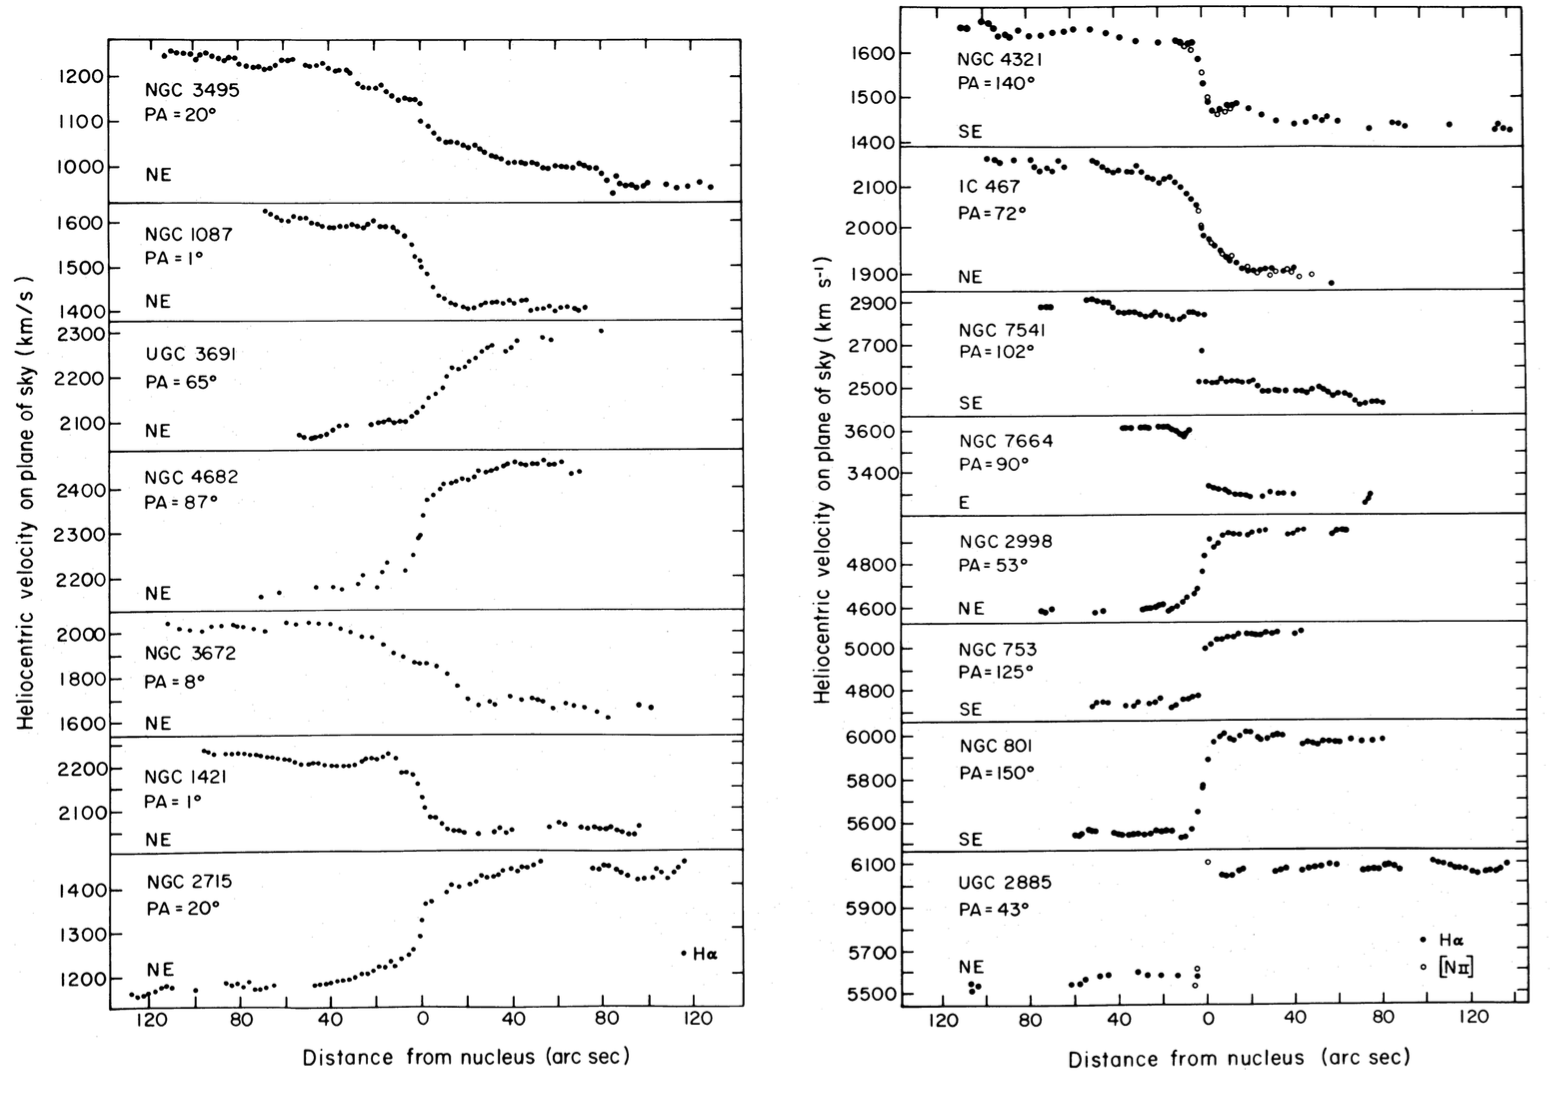 Velocity curve along for Sc galaxies from Rubin et al. (1980)